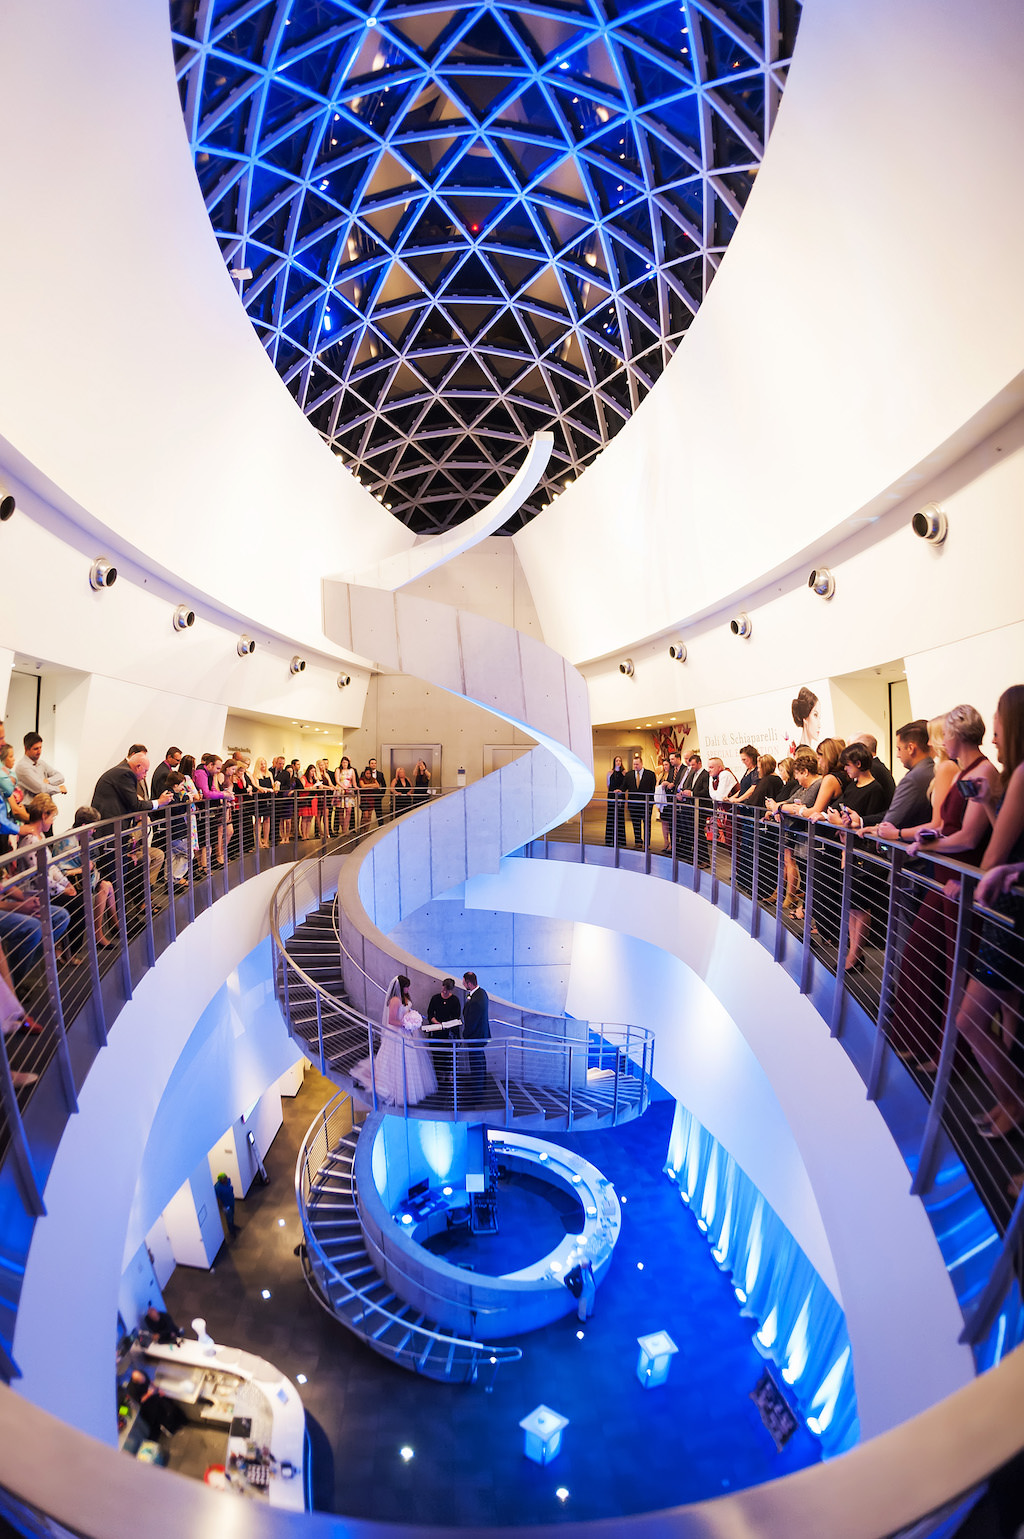 Salvador Dali Museum Ceremony Spiral White Staircase with Blue Uplighting and Bride and Groom Exchanging Vows with Guests Overlooking Balcony